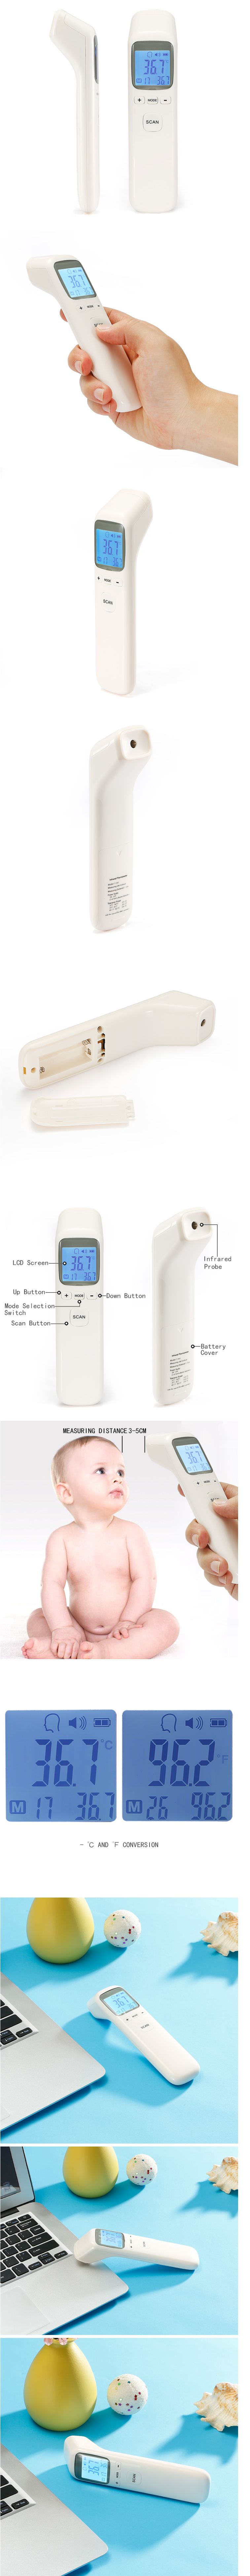 Forehead Gun, Boby Thermometer, Digital Thermometer, Fast Reading Thermometer, Fever Alarm, Ear Thermometer, Fore Head Thermometer,